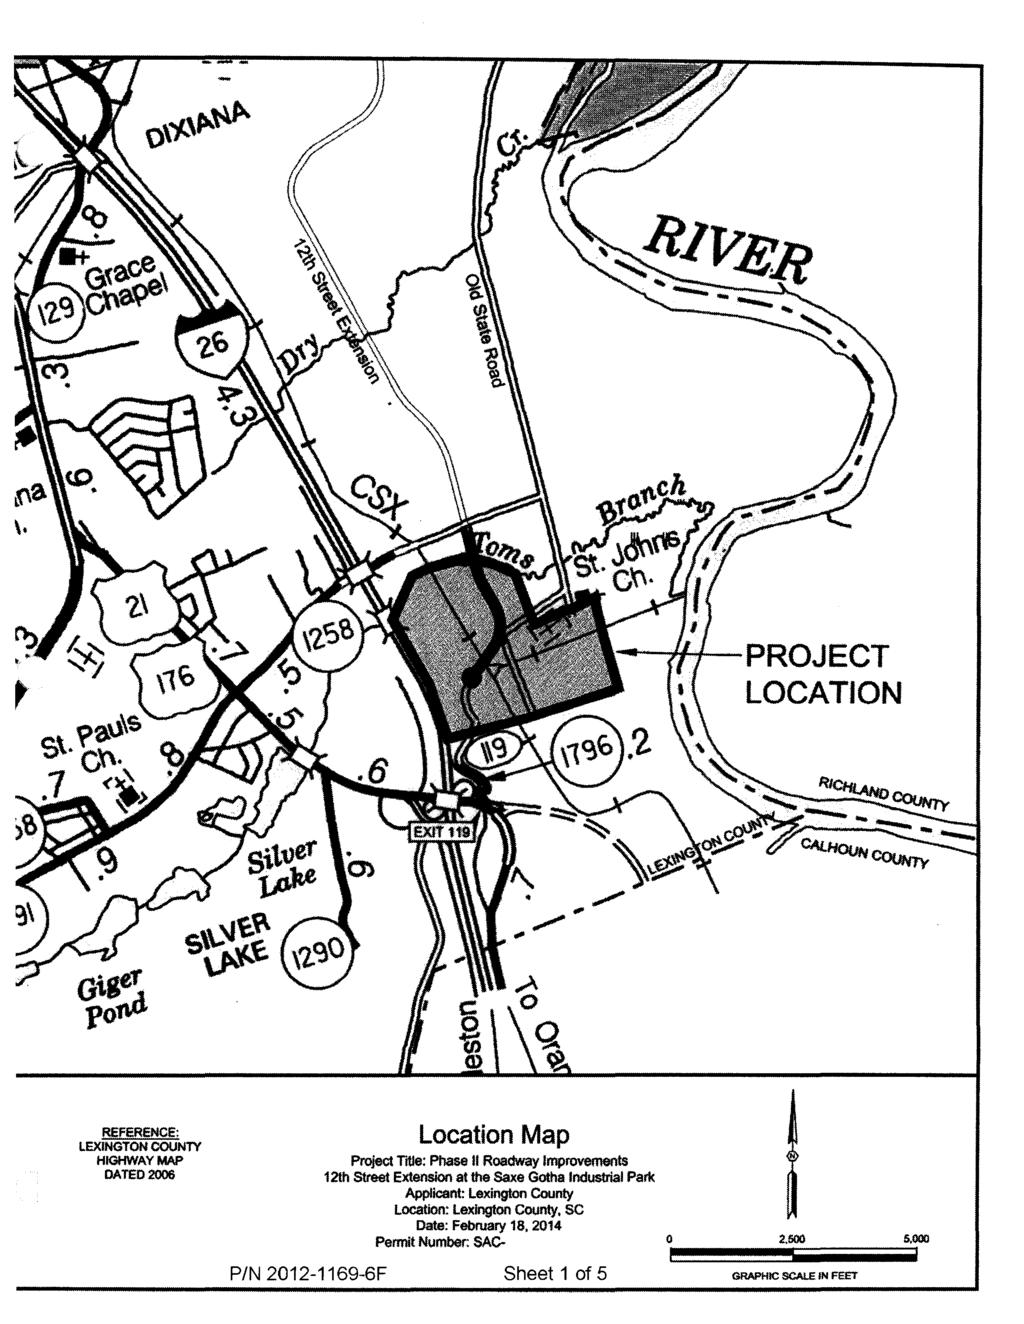 ...,..._-+#-+-_PROJECT LOCATION REFERENCE: LEXINGTON COUNTY HIGHWAY MAP DATED2006 Location Map Project Title: Phase II Roadway Improvements 12th Street Extension at the Saxe Gotha